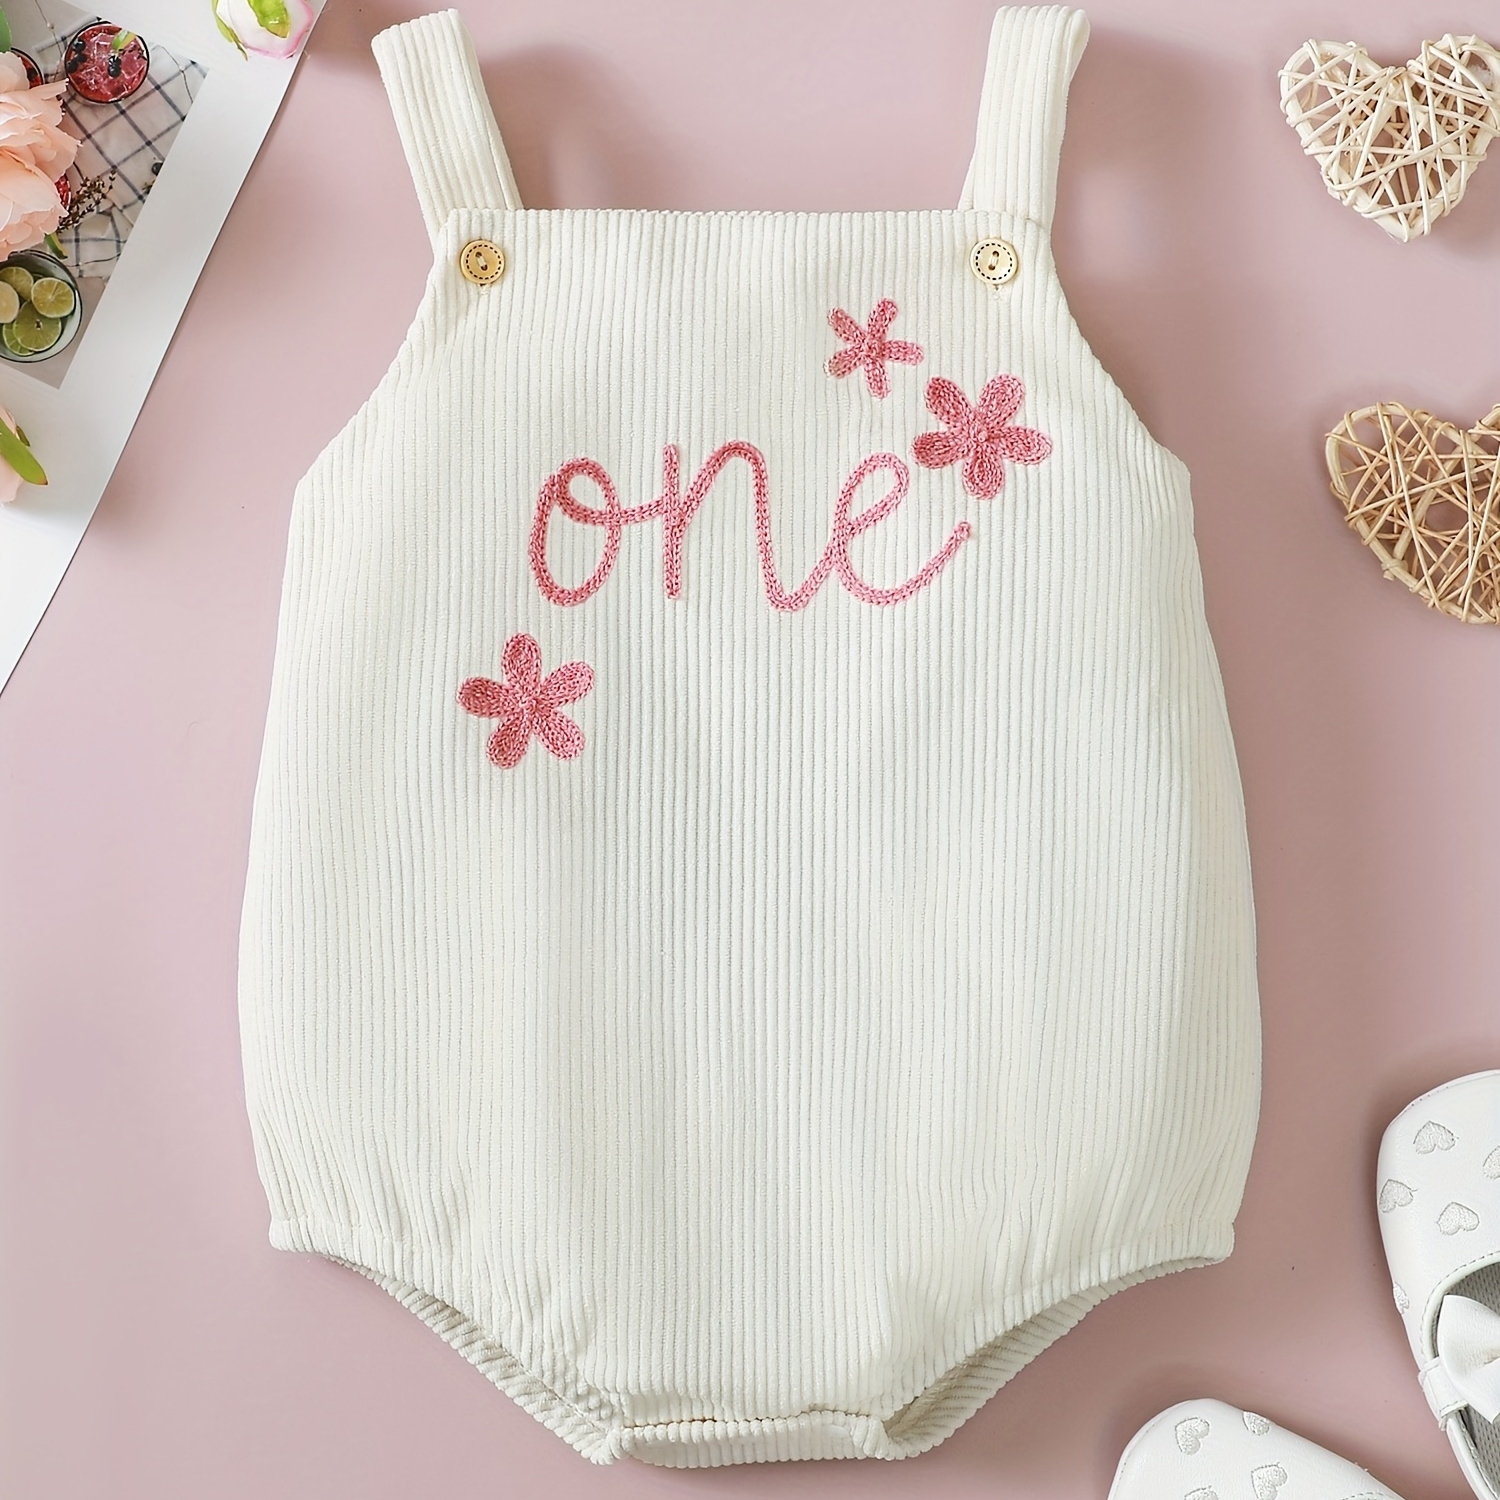 

Baby's "one" Embroidered Corduroy Triangle Bodysuit, Casual Romper, Toddler & Infant Girl's Onesie For Summer, As First Birthday Gift